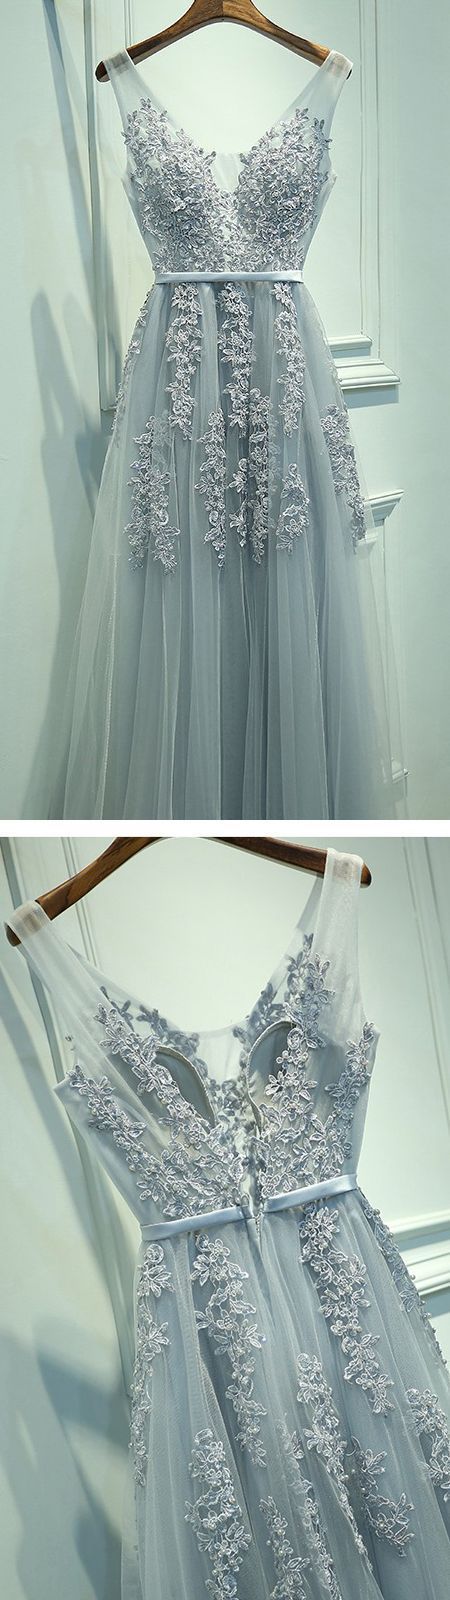 Elegant Homecoming Dress,long Appliques Prom Dress,sleeveless Tulle Long Dress For Prom,evening Party Dress M0281